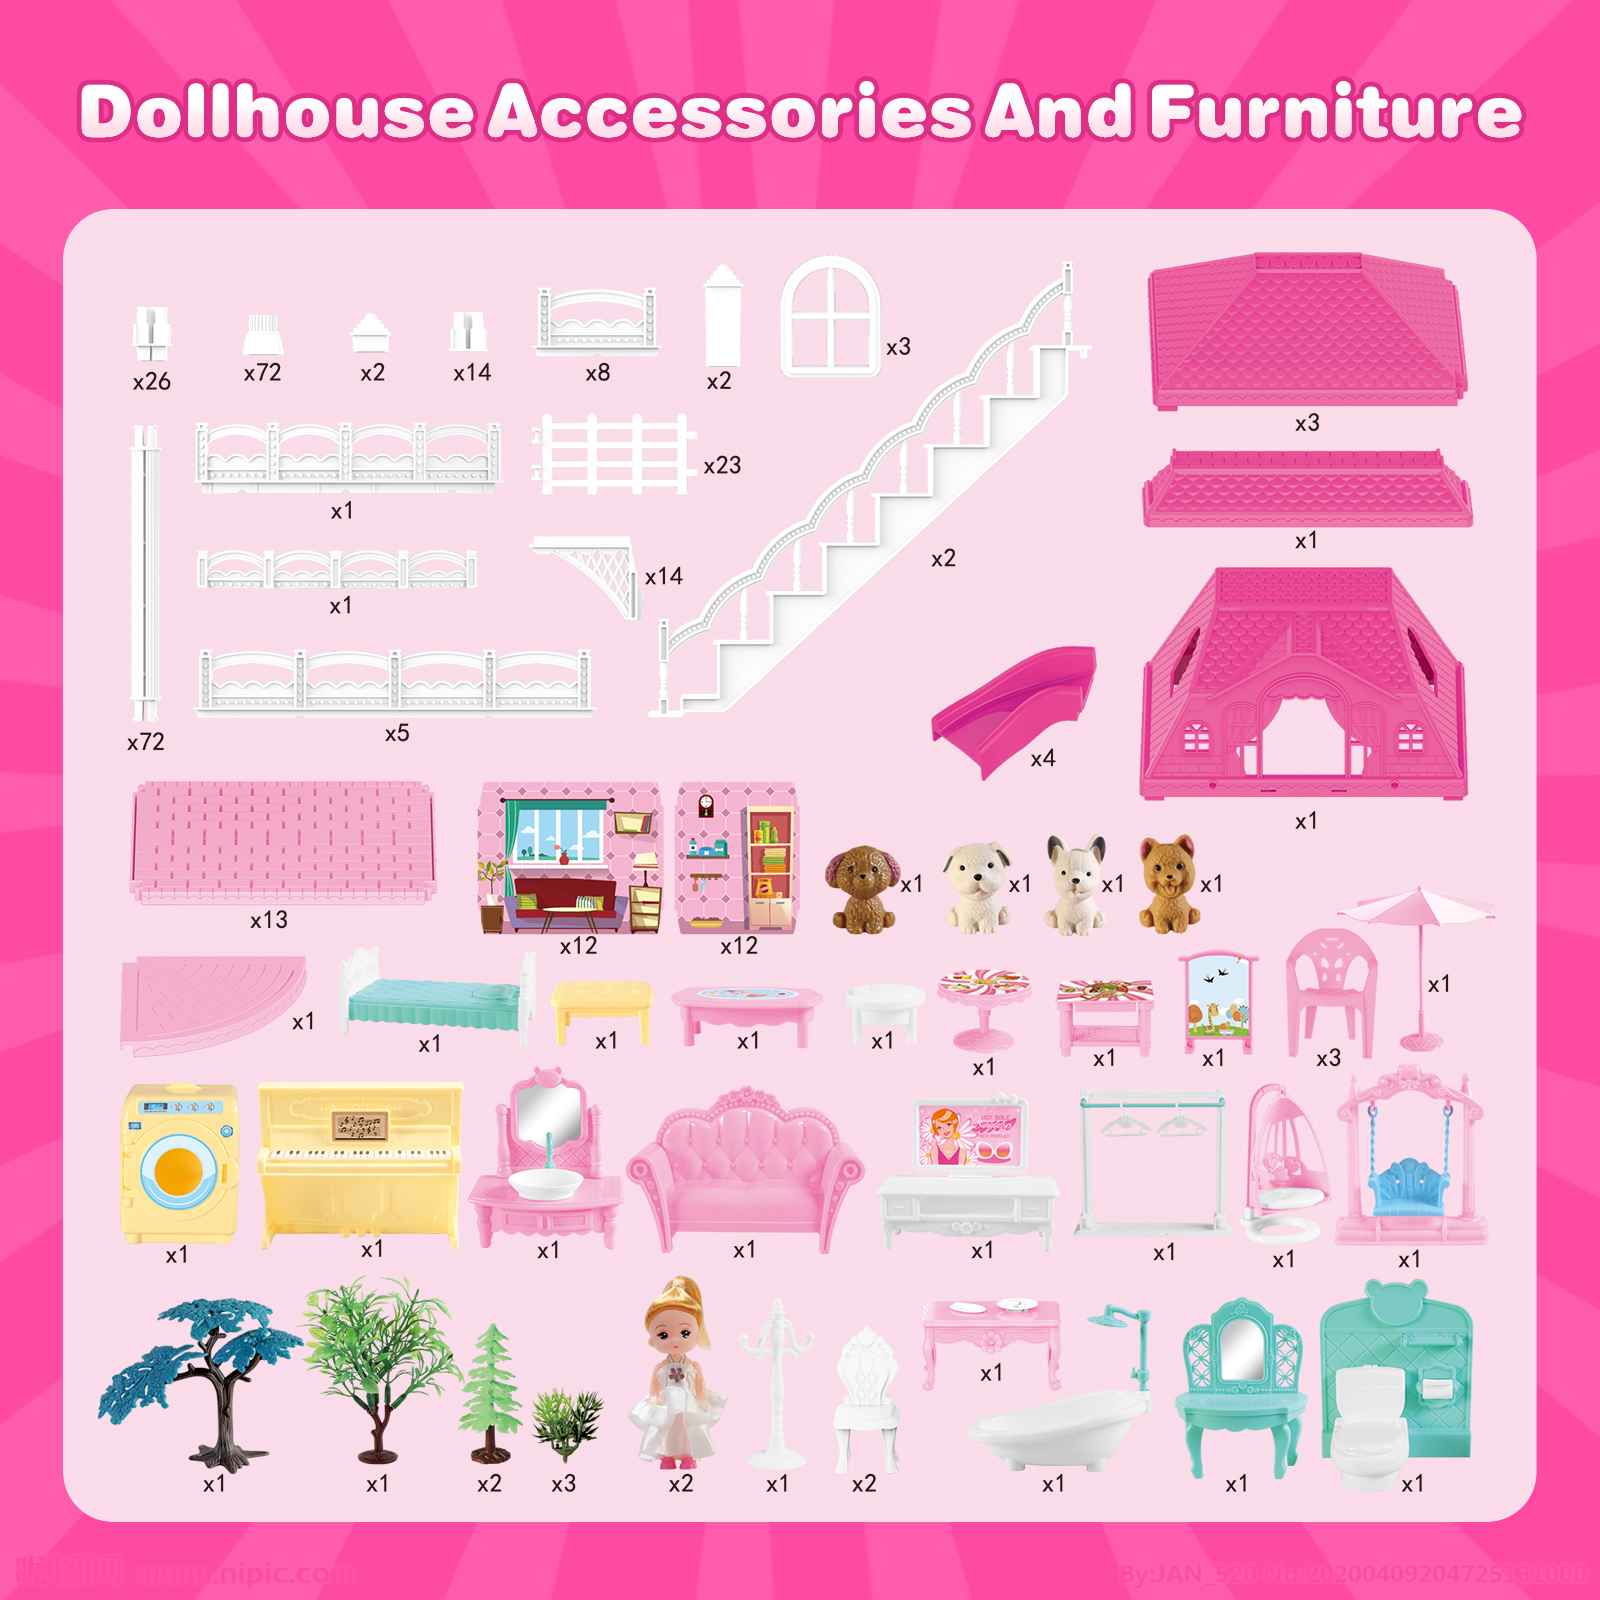 Hot Bee Dollhouse for Girls,4-Story 12 Rooms Playhouse with 2 Dolls Toy Figures,Pretend Dreamhouse with Accessories,Gift Toy for Kids Ages 3 4 5 6 - image 2 of 7